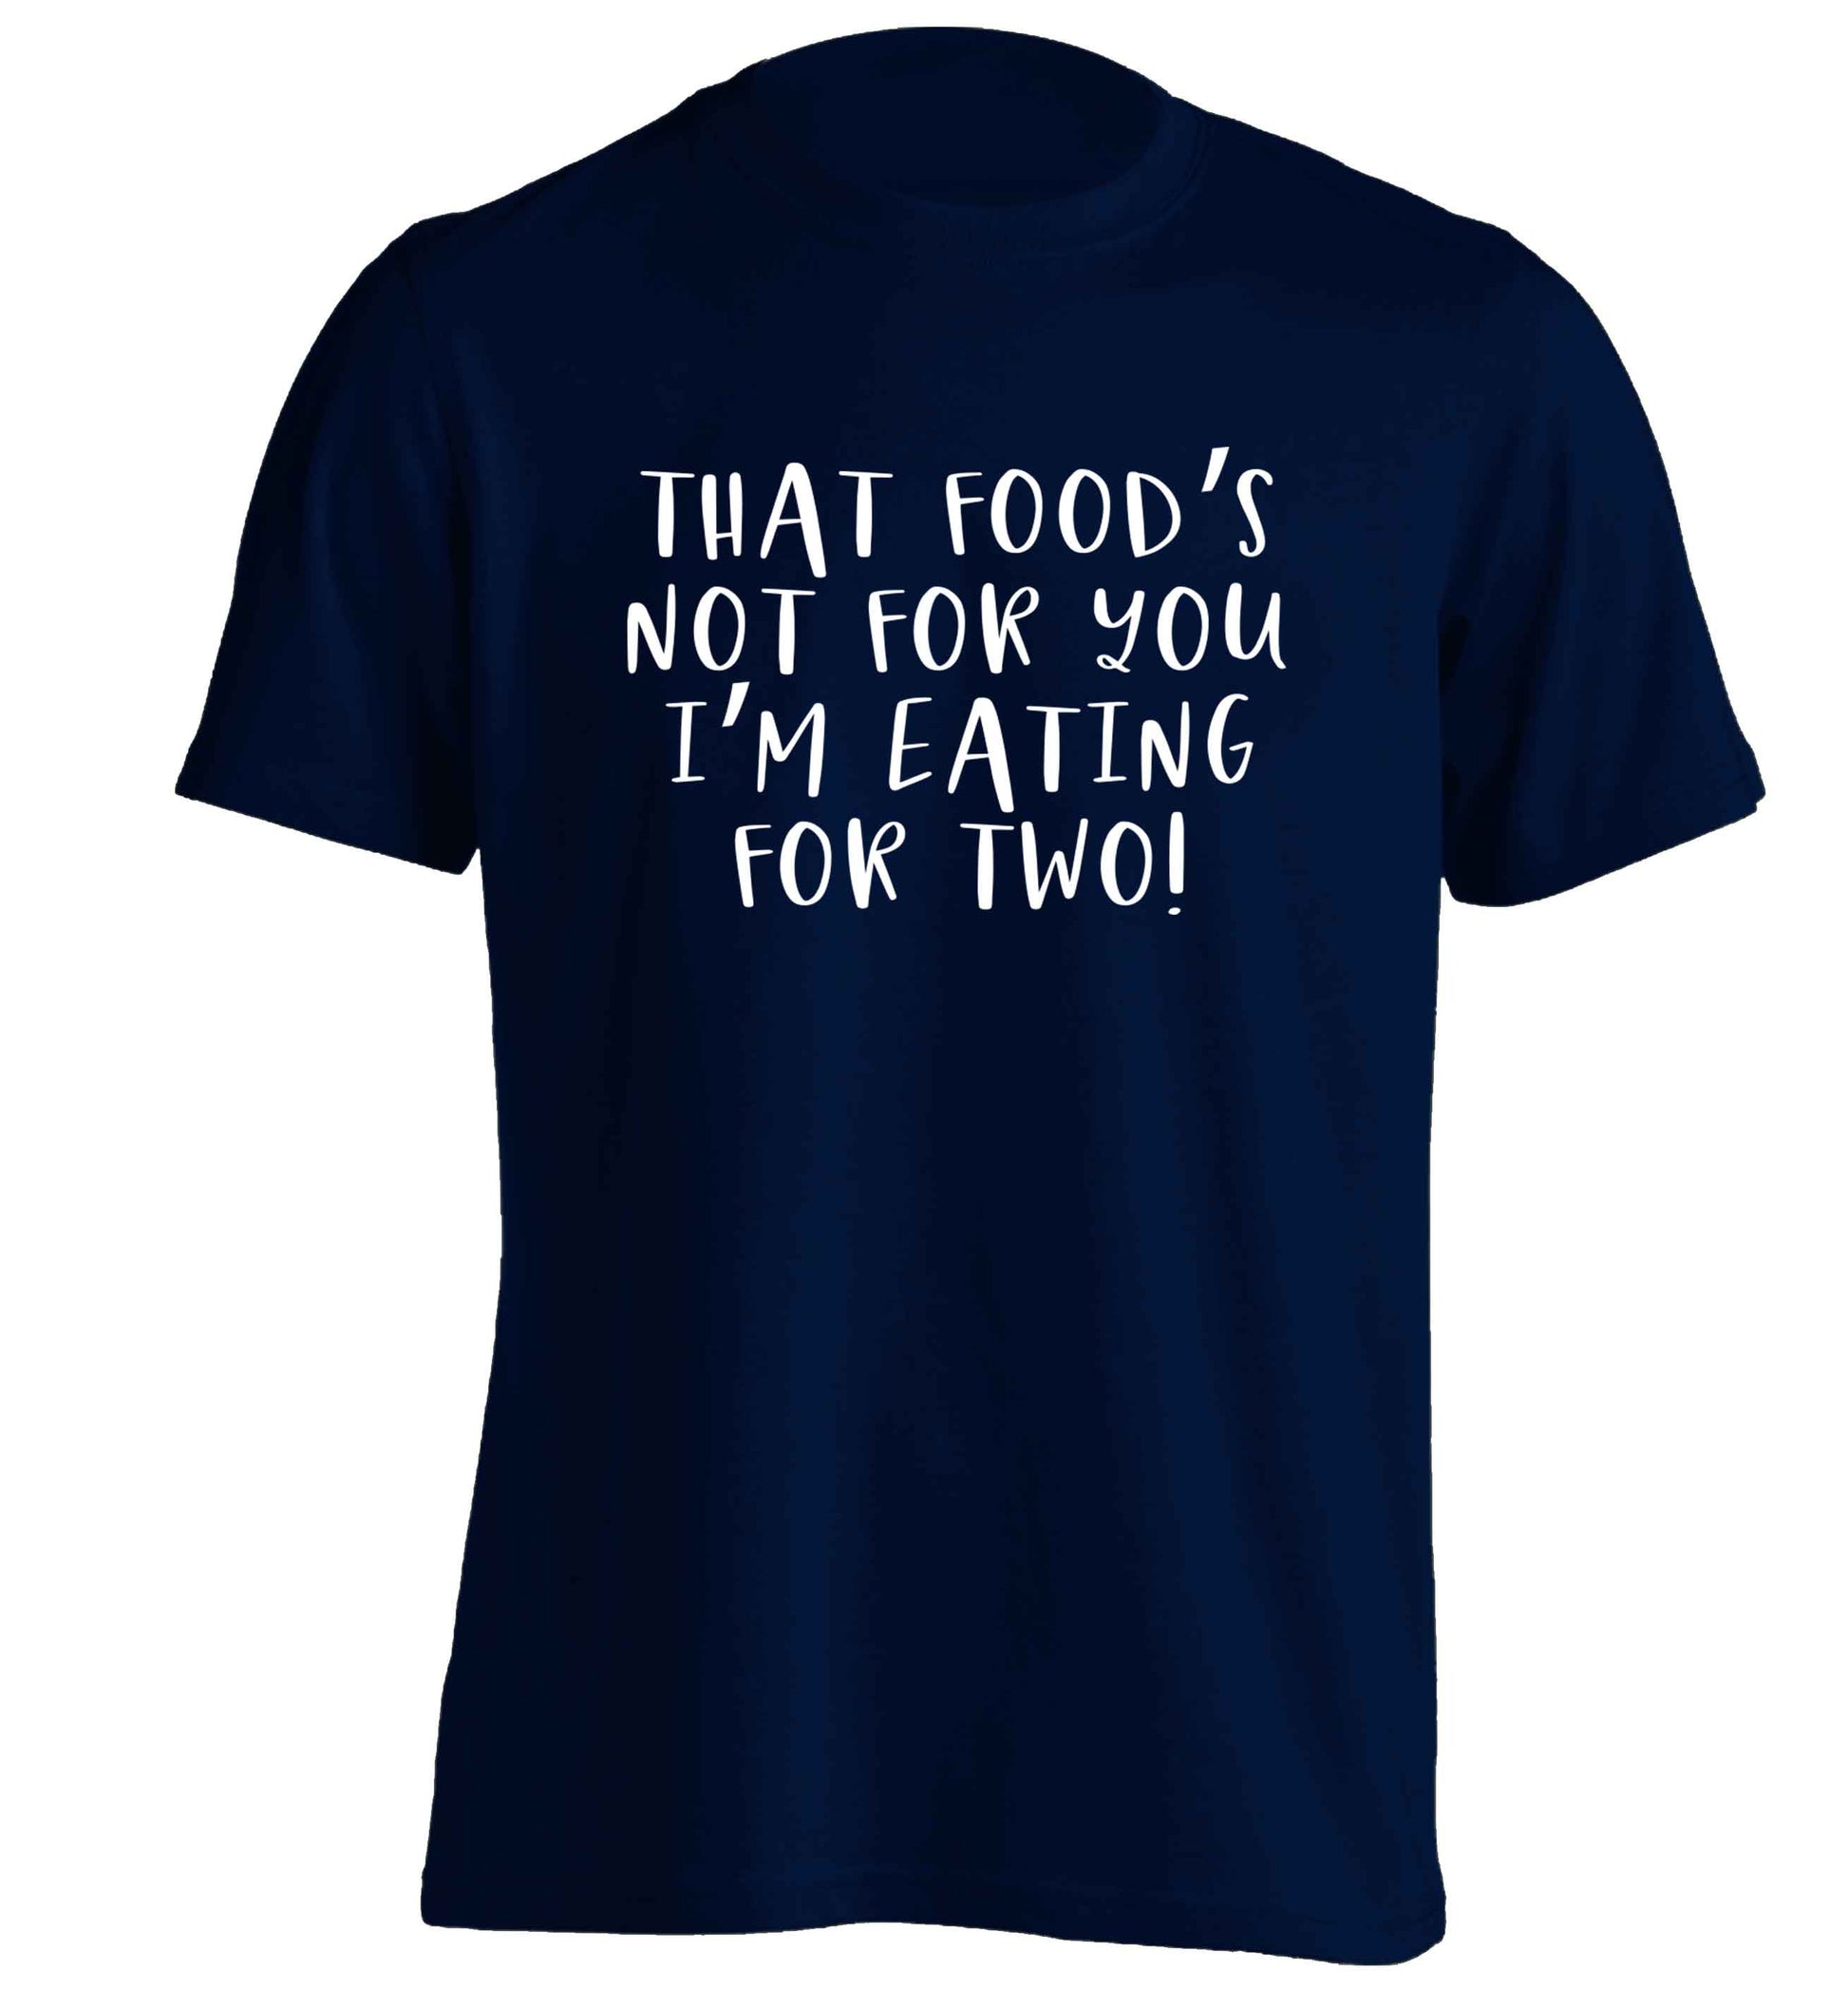 That food's not for you I'm eating for two adults unisex navy Tshirt 2XL